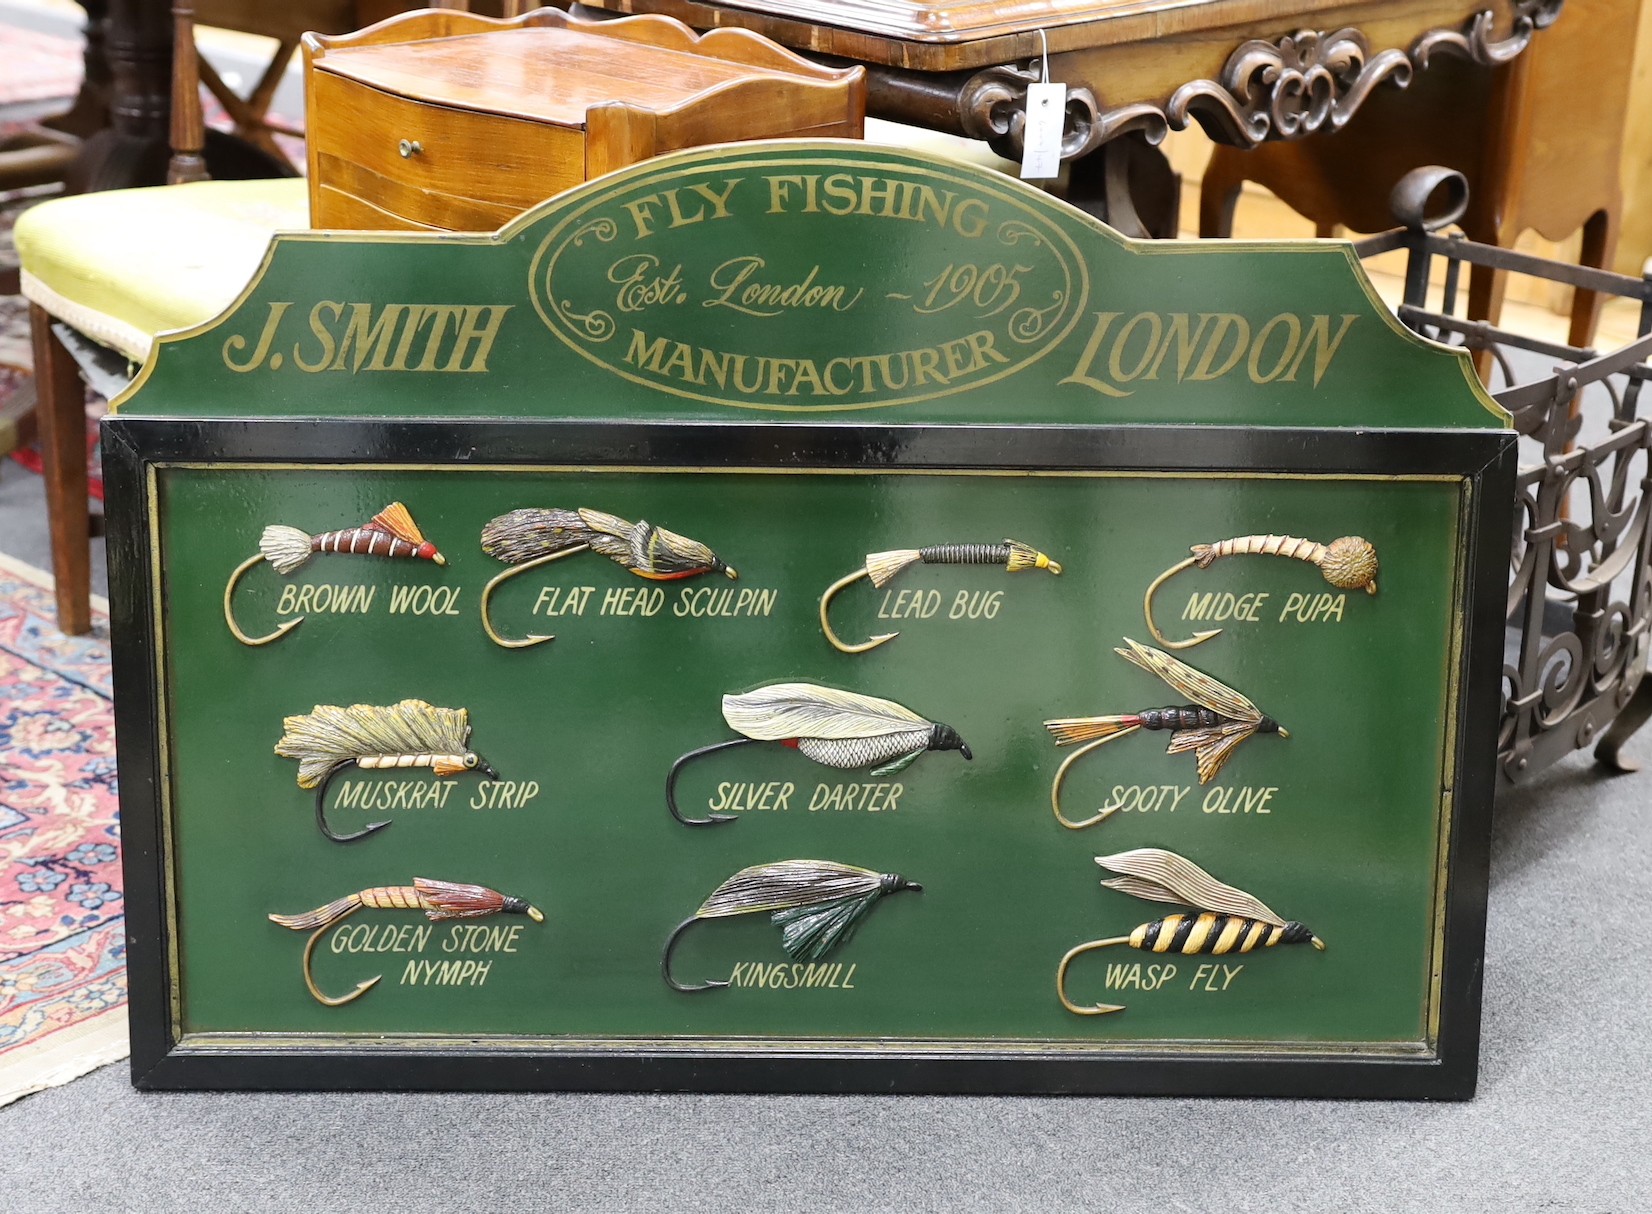 A fly fishing sign J Smith of London, 96cms wide x 65cms high